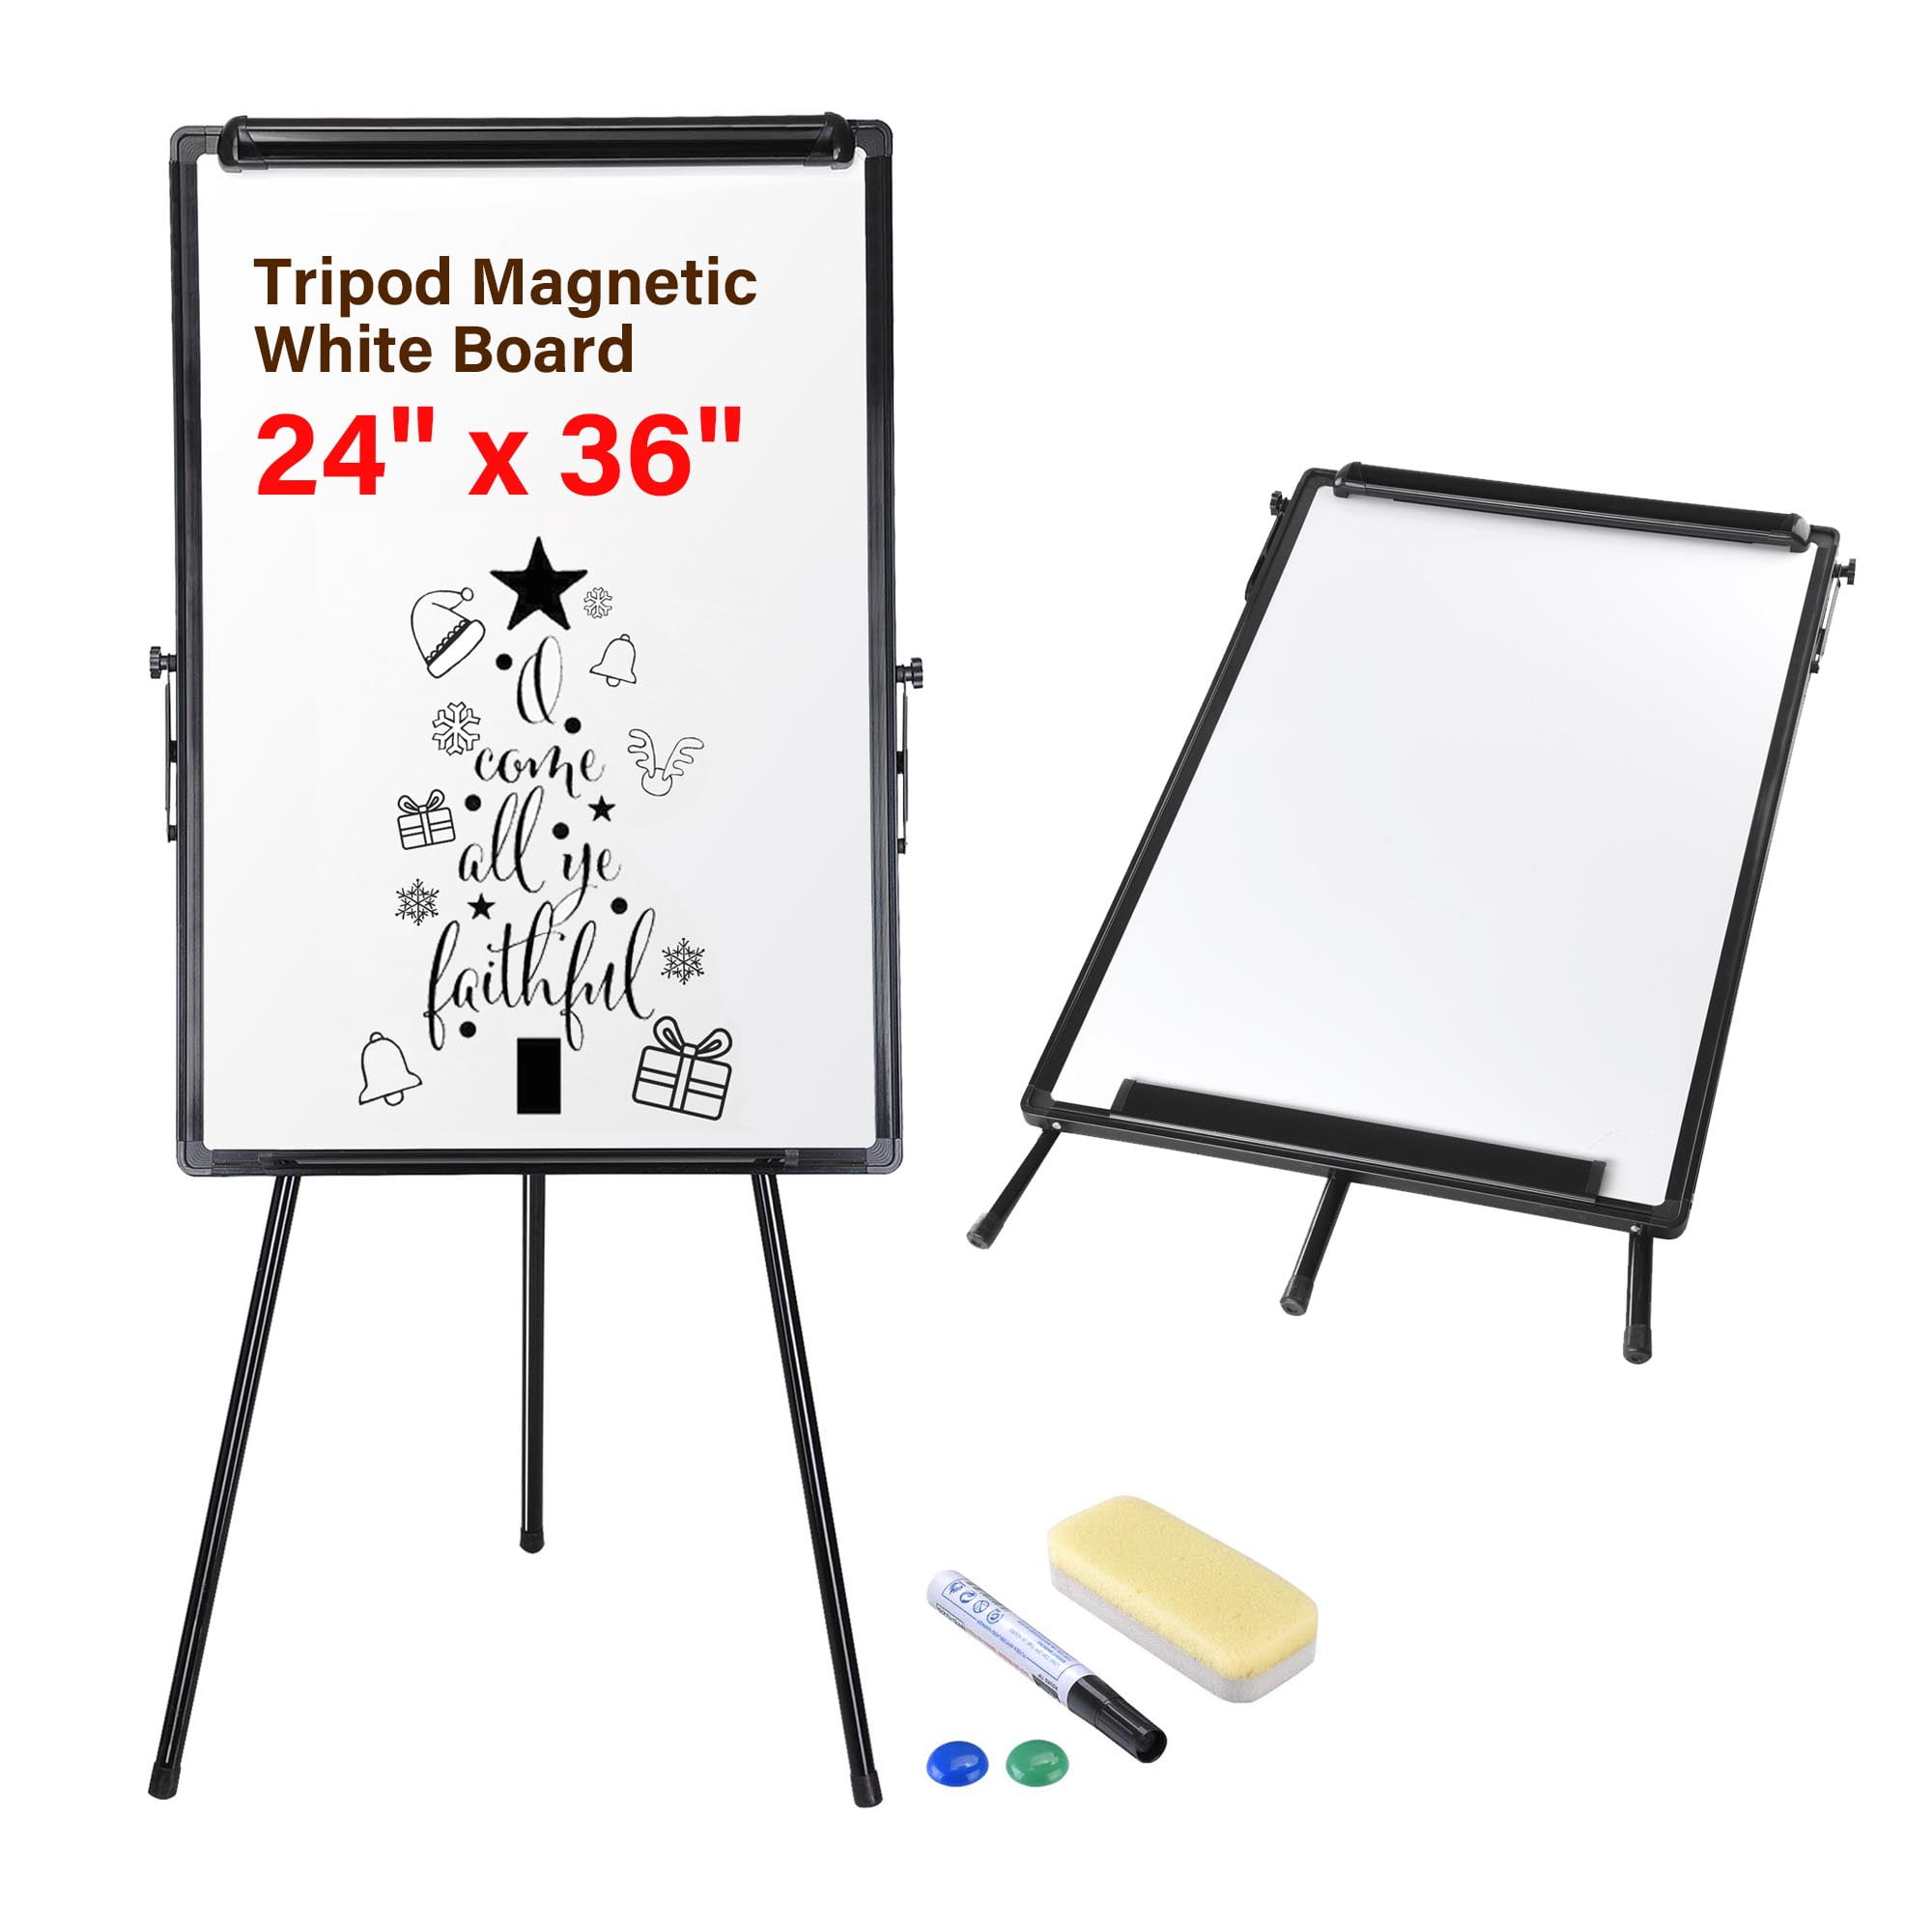 Magnetic Portable Dry Erase Easel Board 36 x 24 Tripod Whiteboard Height Adjustable Flipchart Easel Stand White Board for Office or Teaching at Home & Classroom Easel Whiteboard 